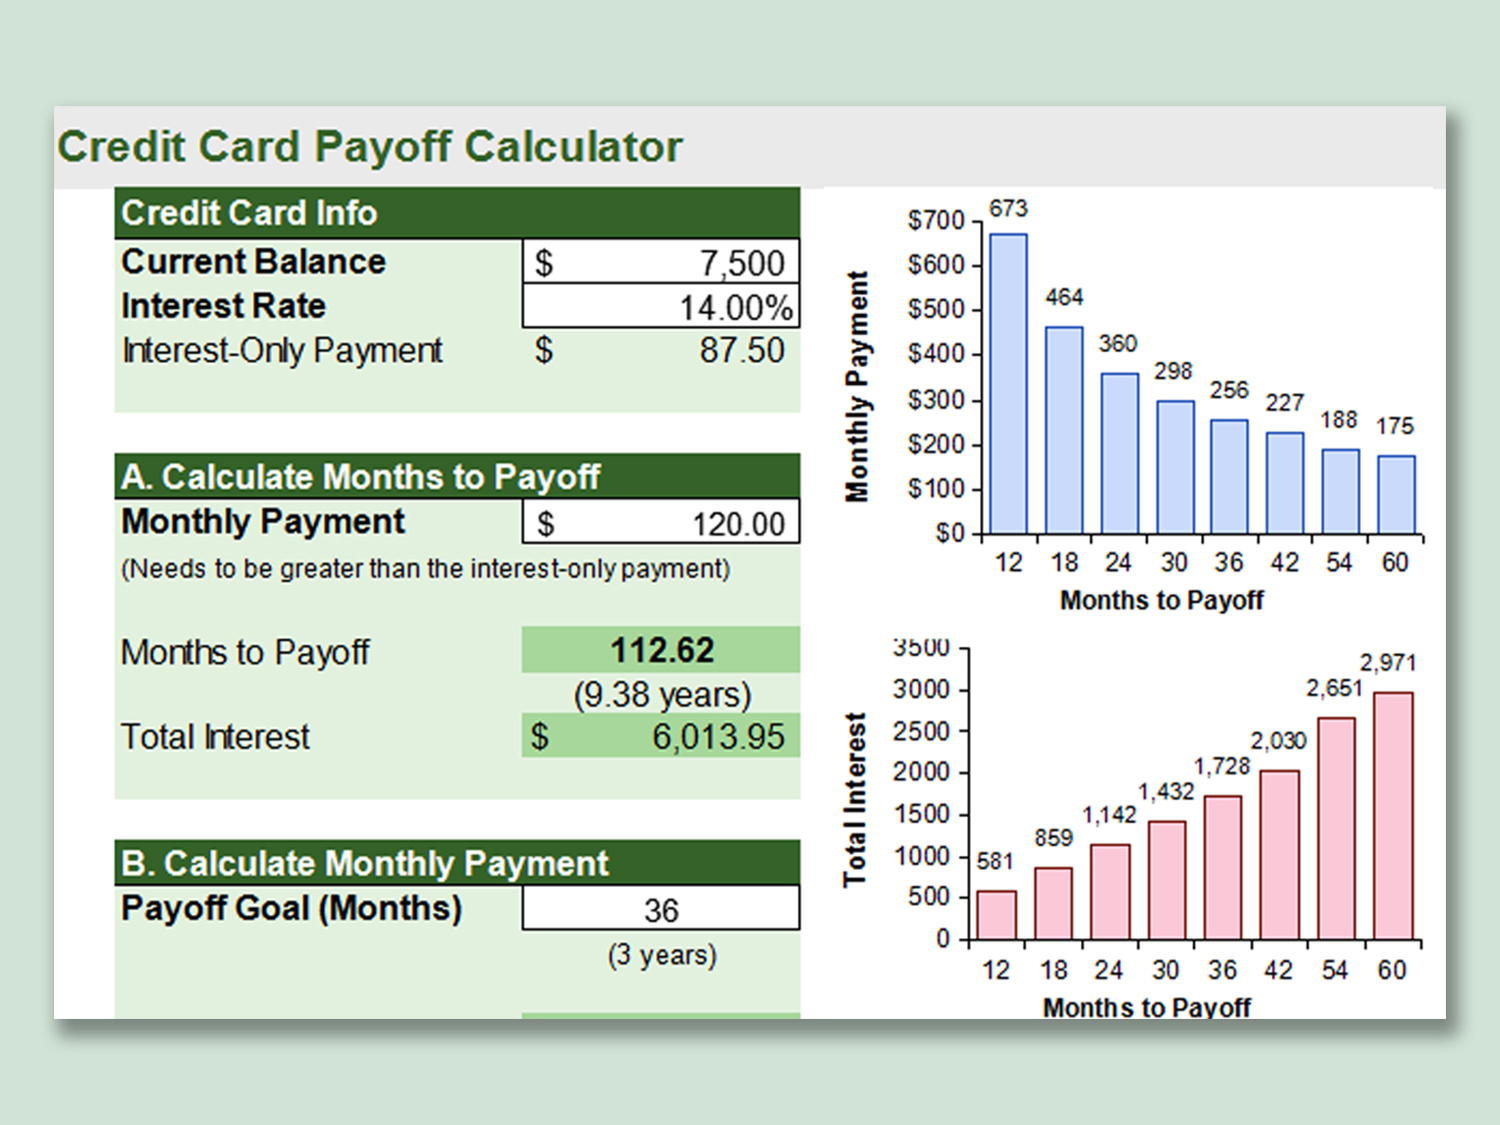 Calculate minimum payments to repay multiple credit cards or other personal loans.